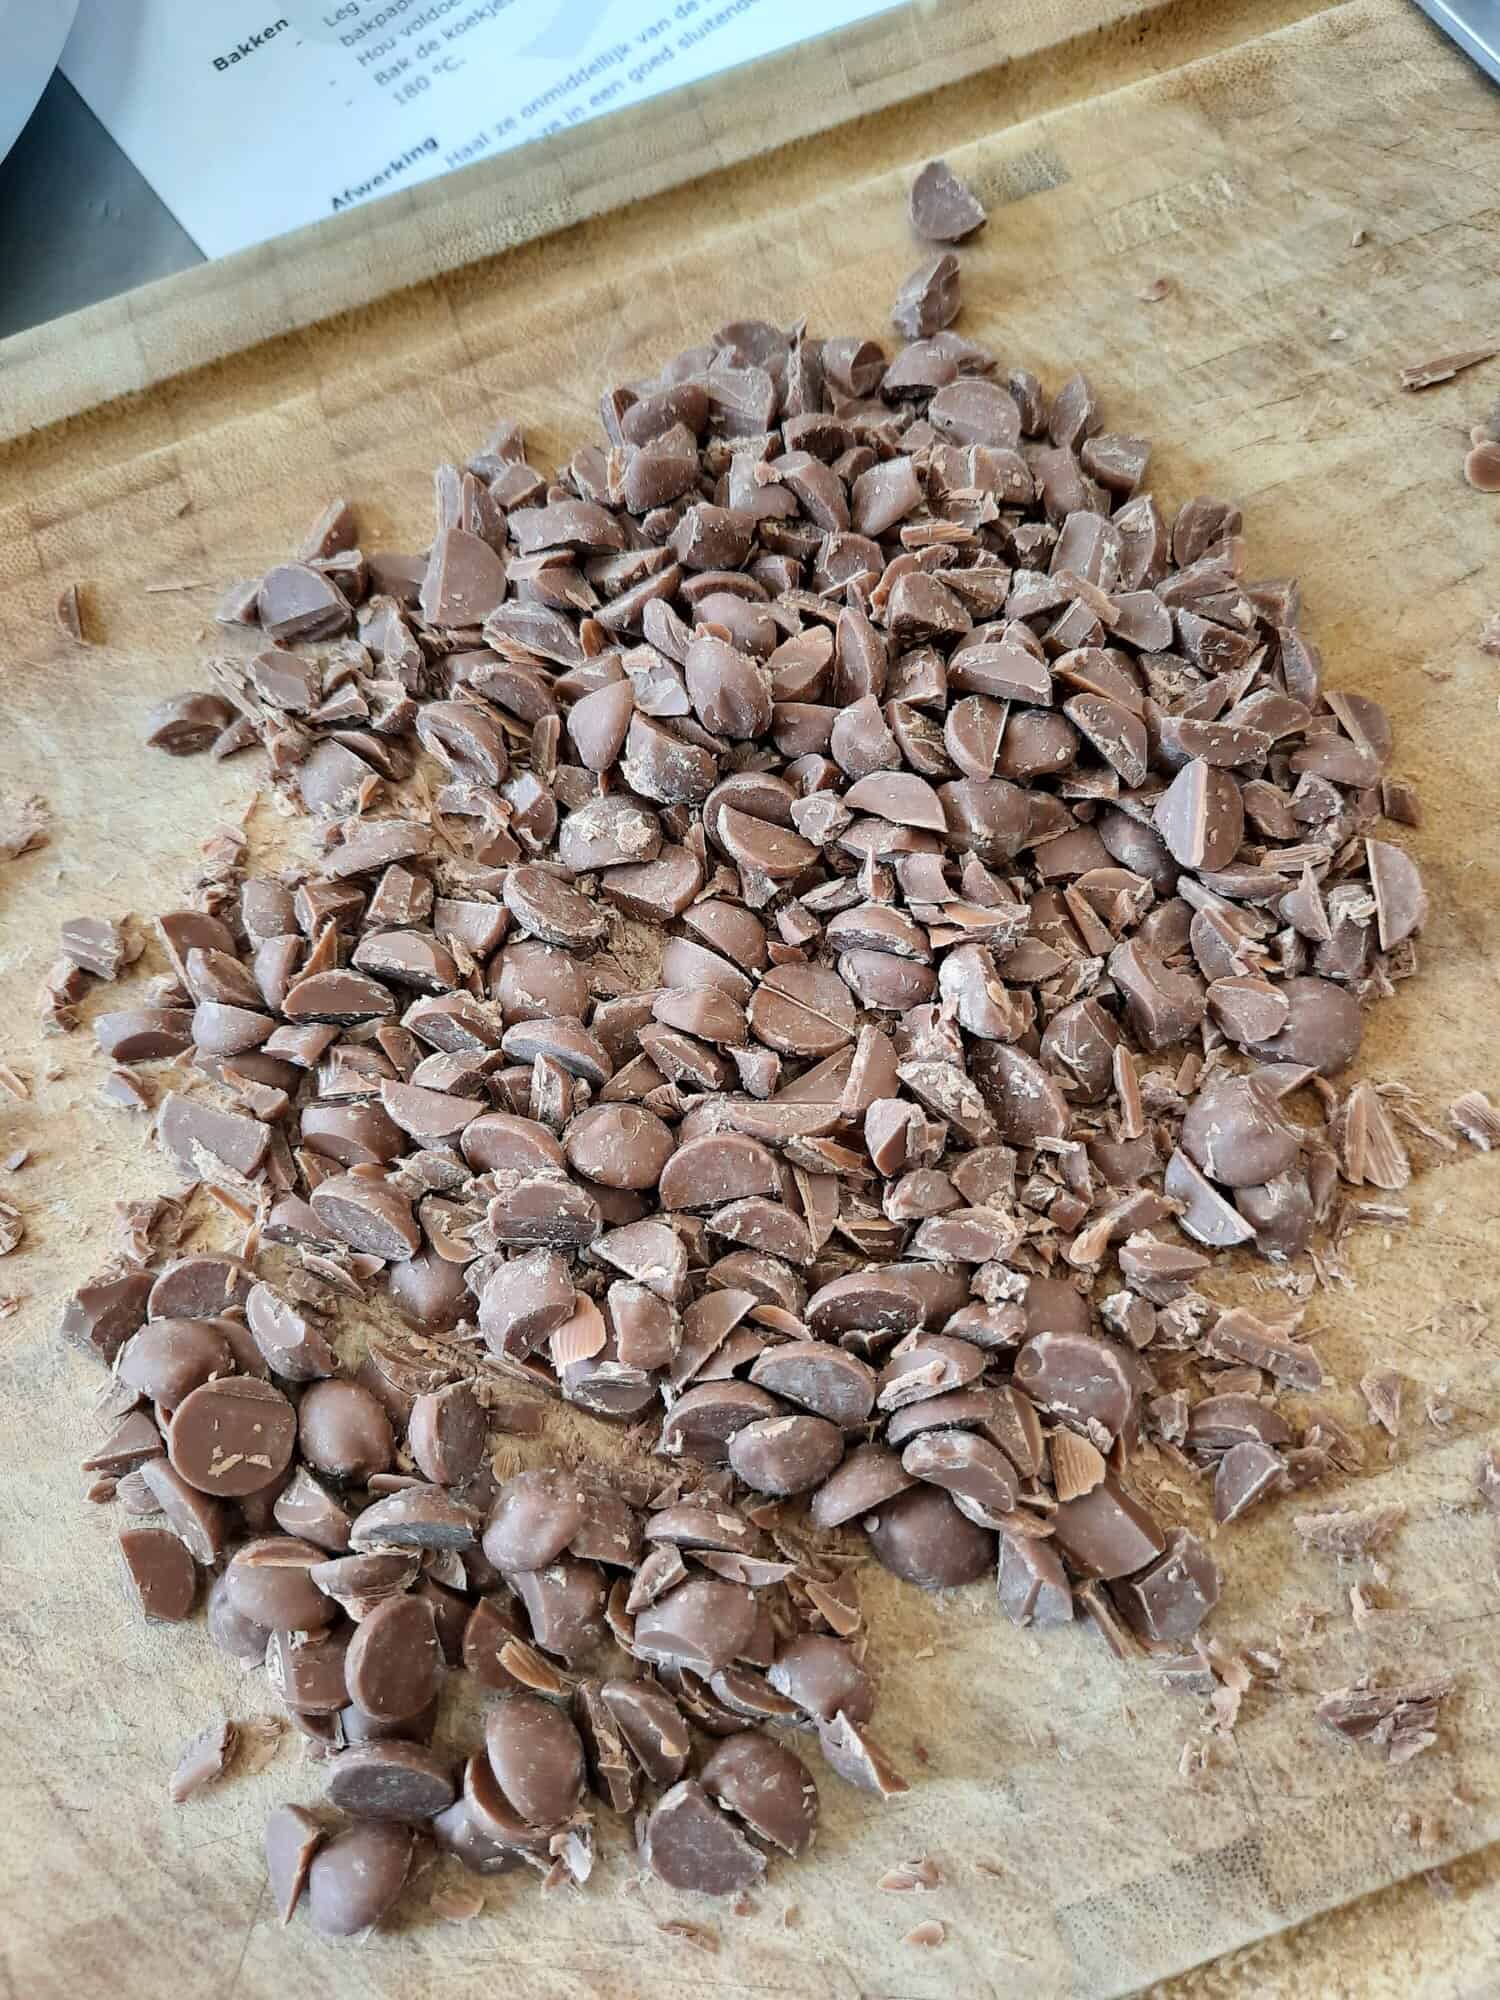 Chopped up chocolate chips